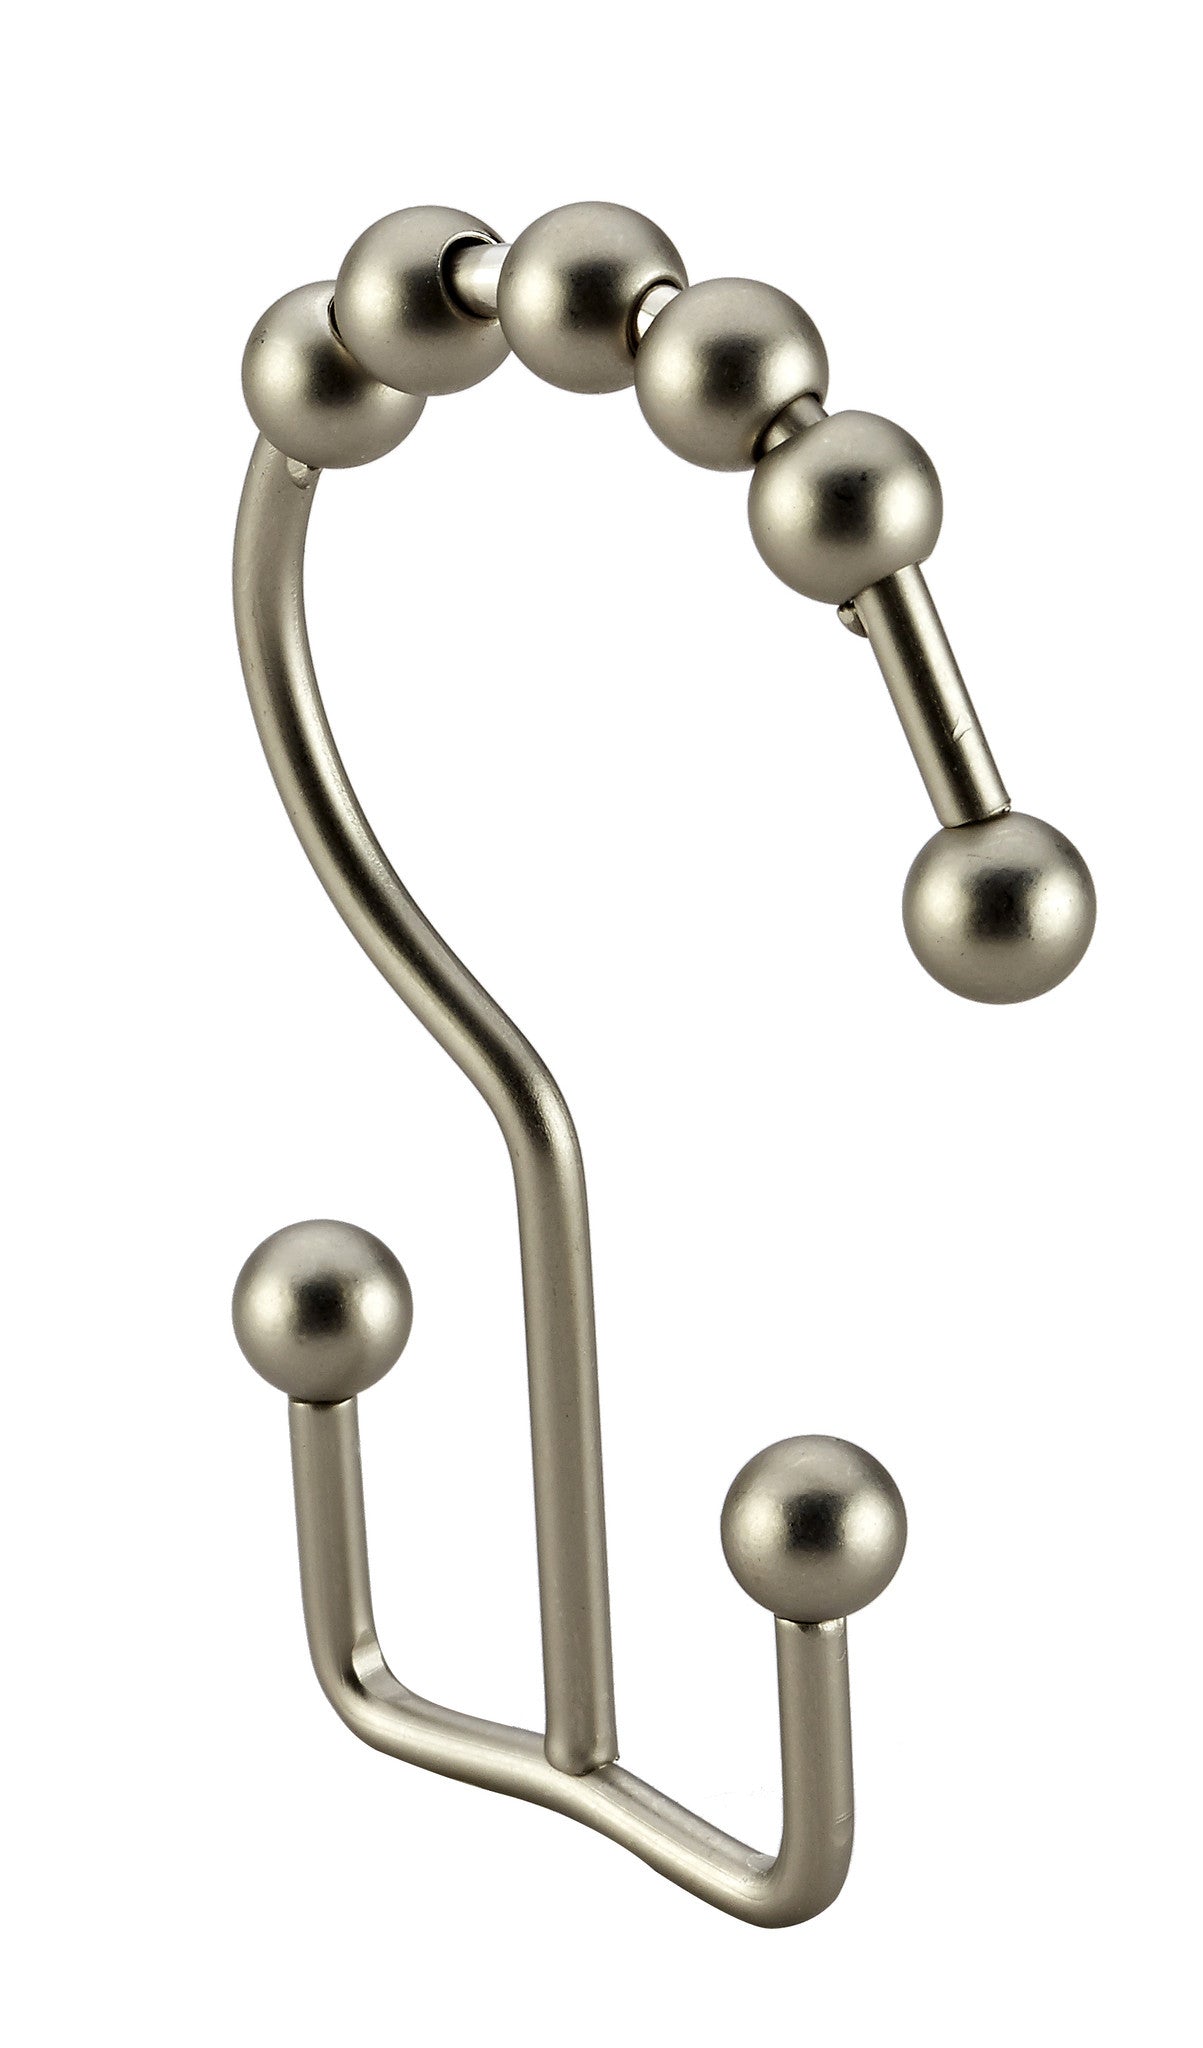 Pro Chef Kitchen Tools Brushed Nickel Roller Shower Curtain Rings